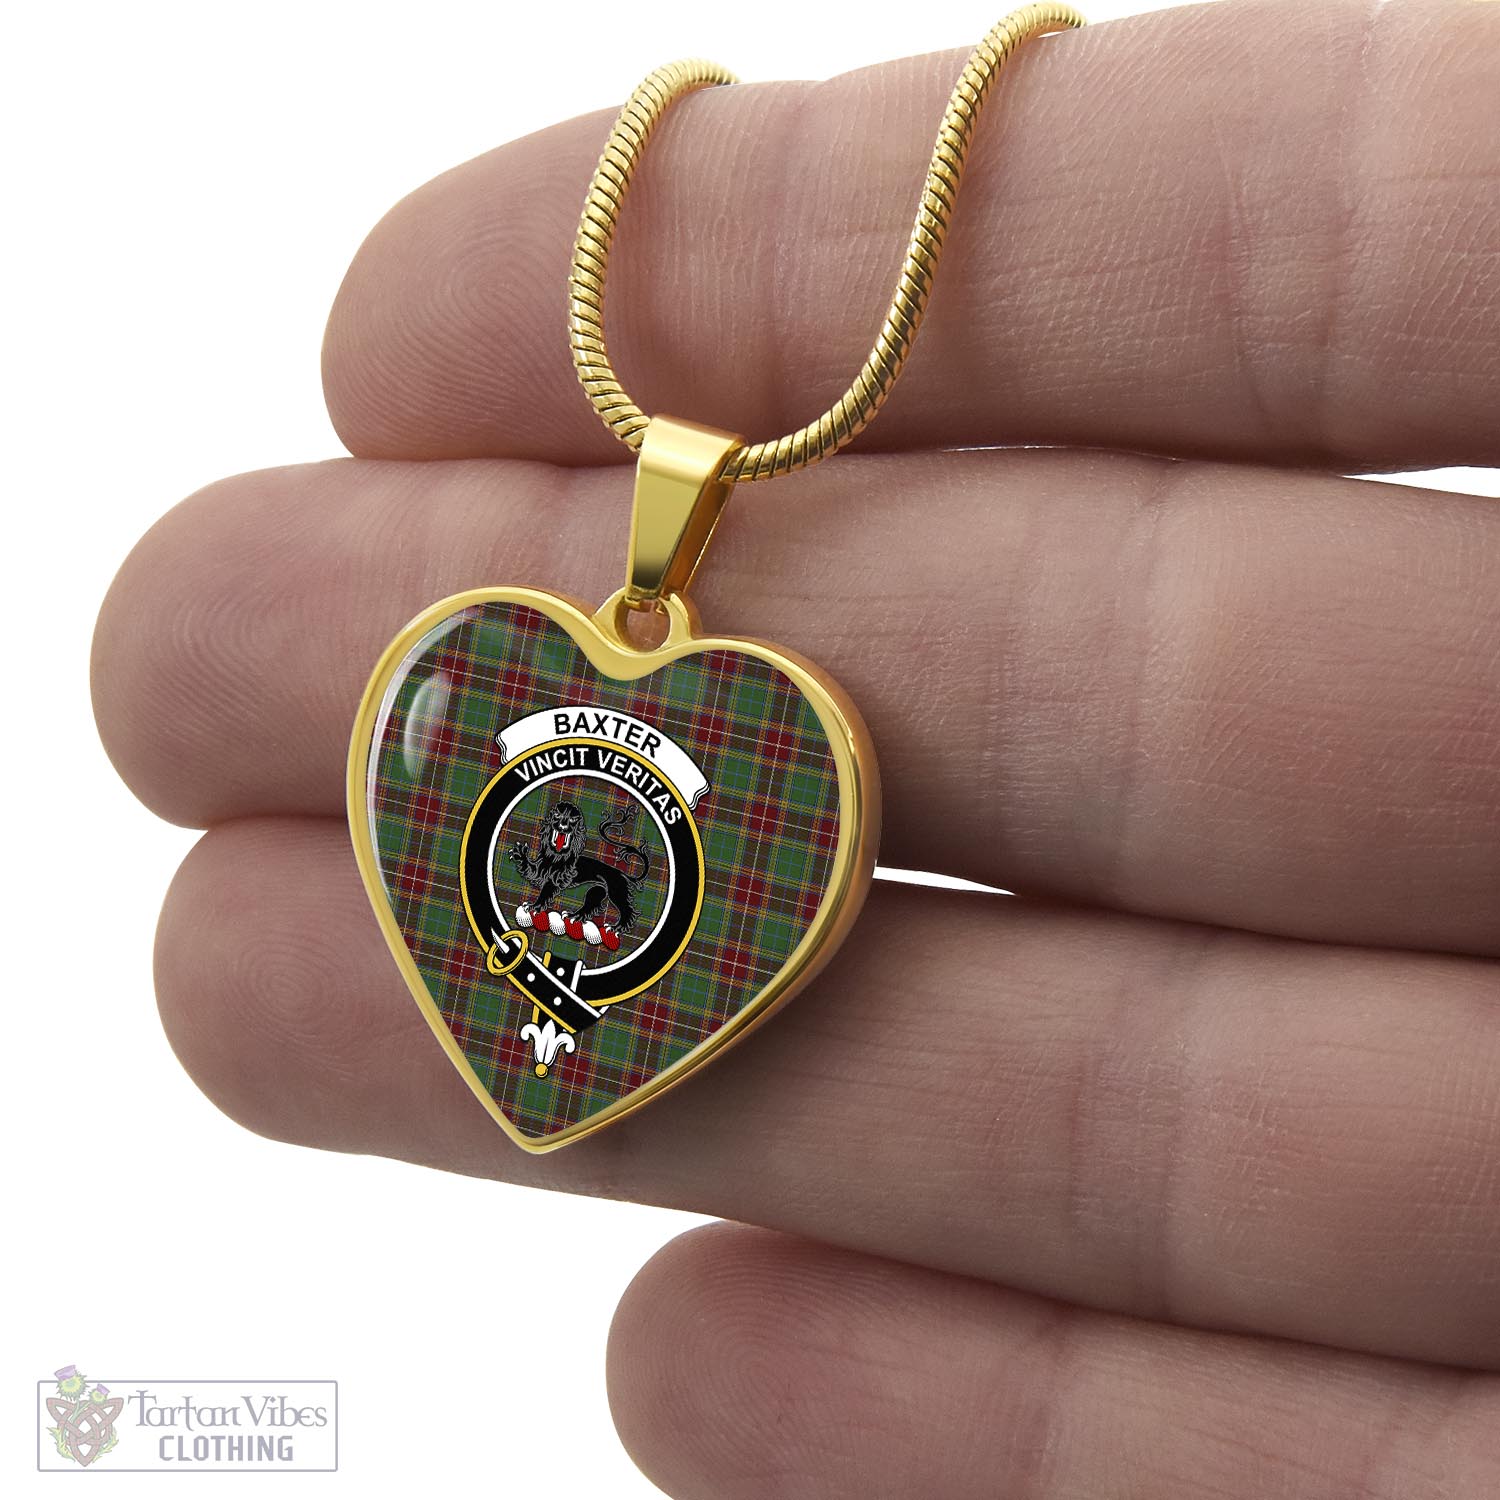 Tartan Vibes Clothing Baxter Tartan Heart Necklace with Family Crest